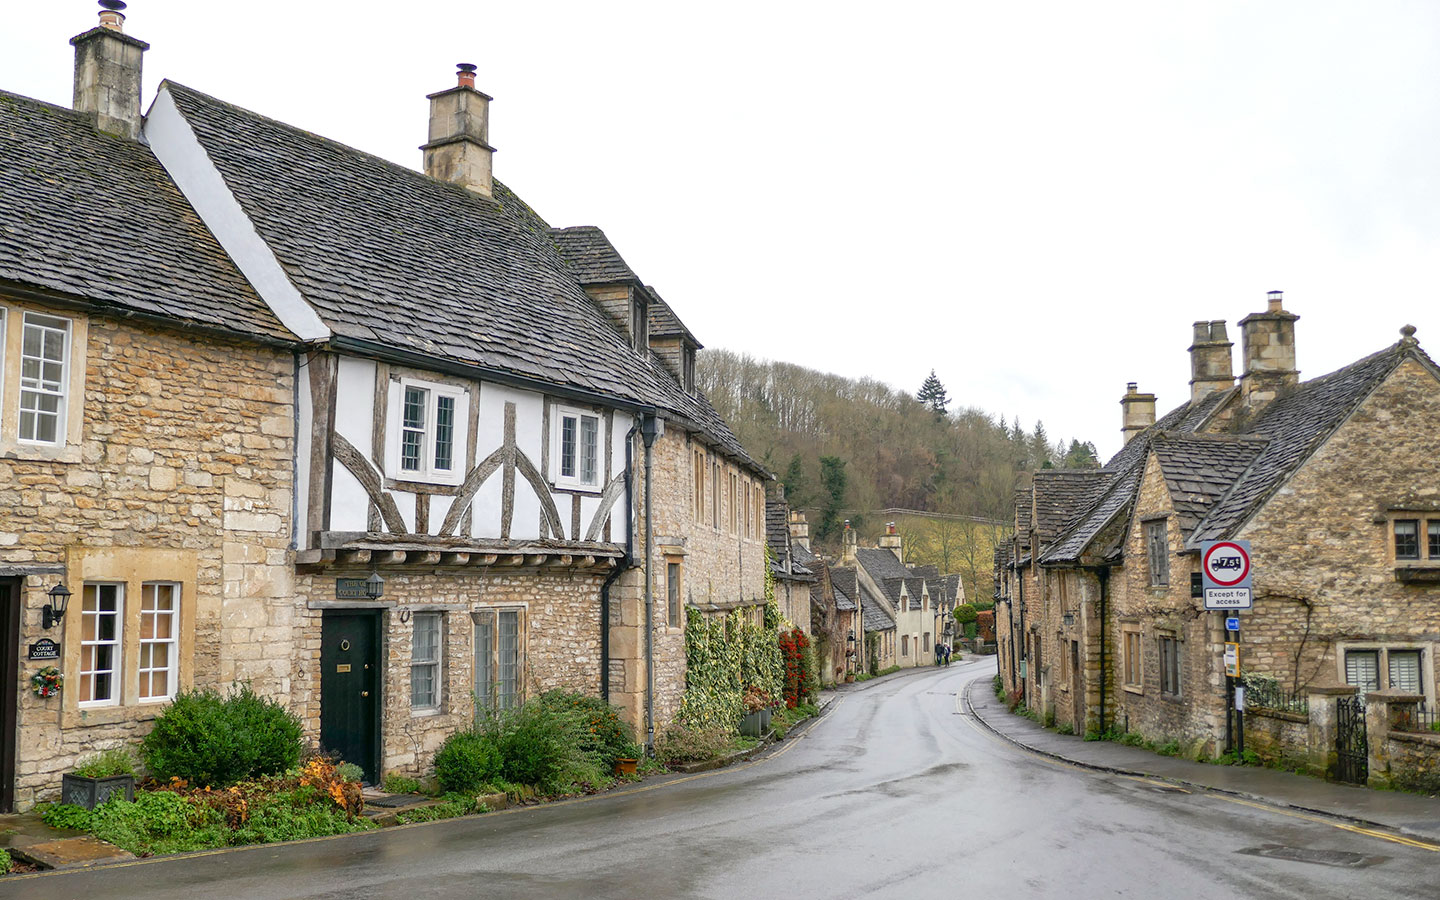 The Street in Castle Combe